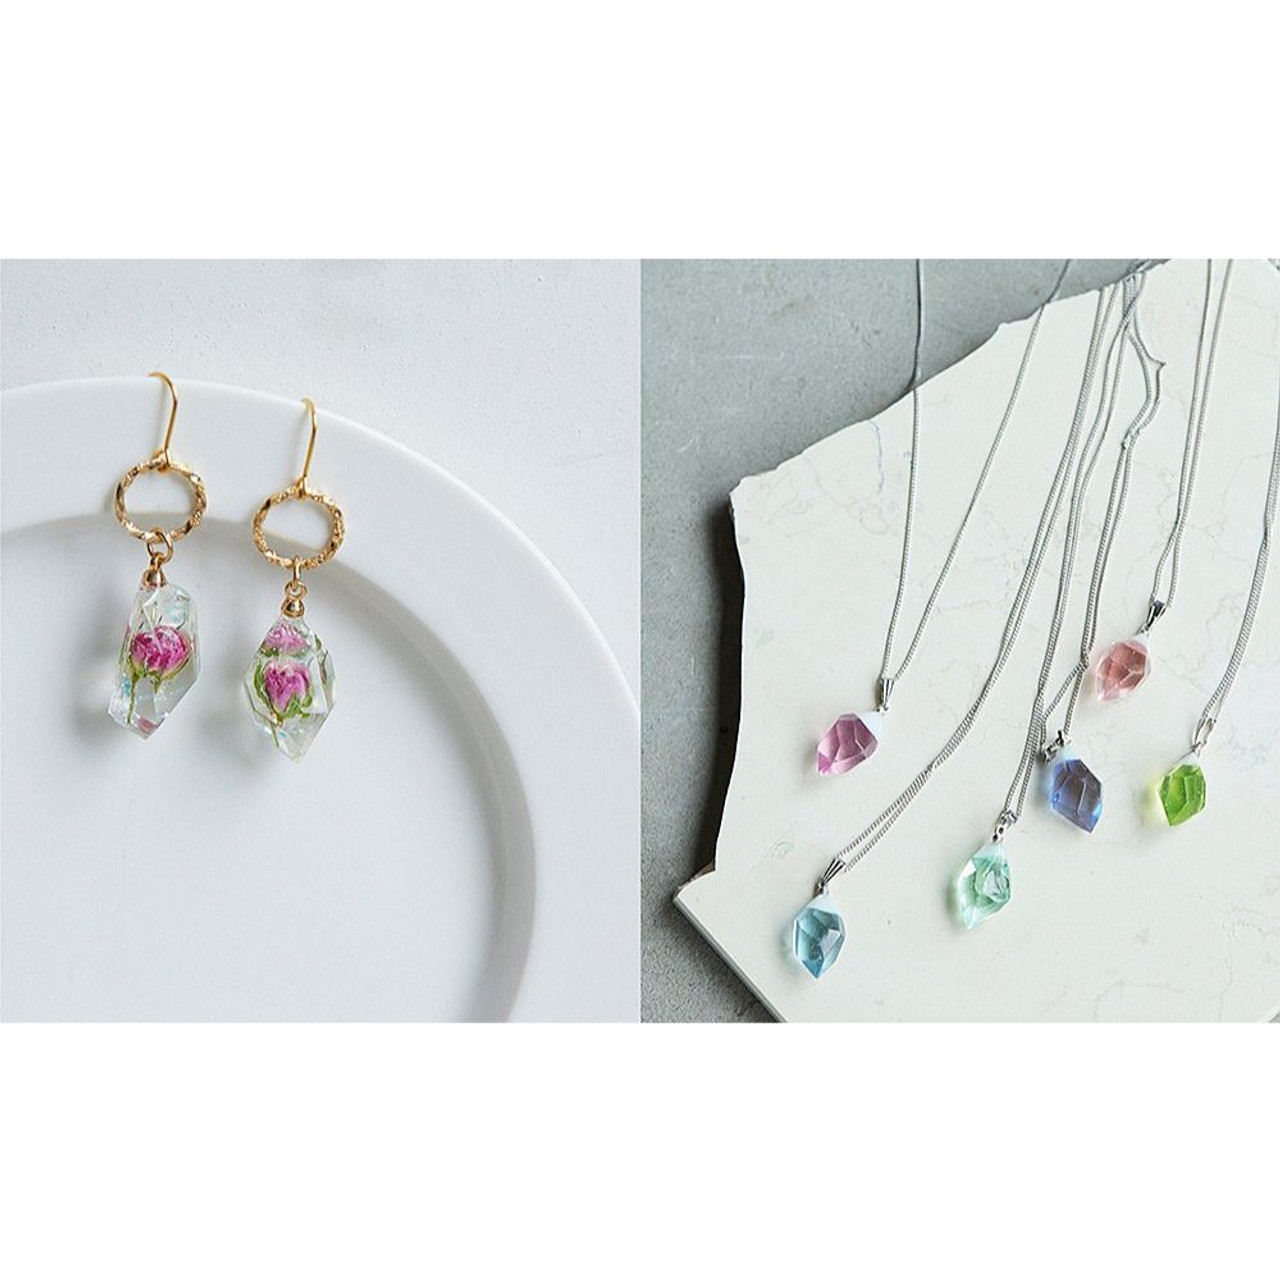 Encase flowers and create crystal necklaces 